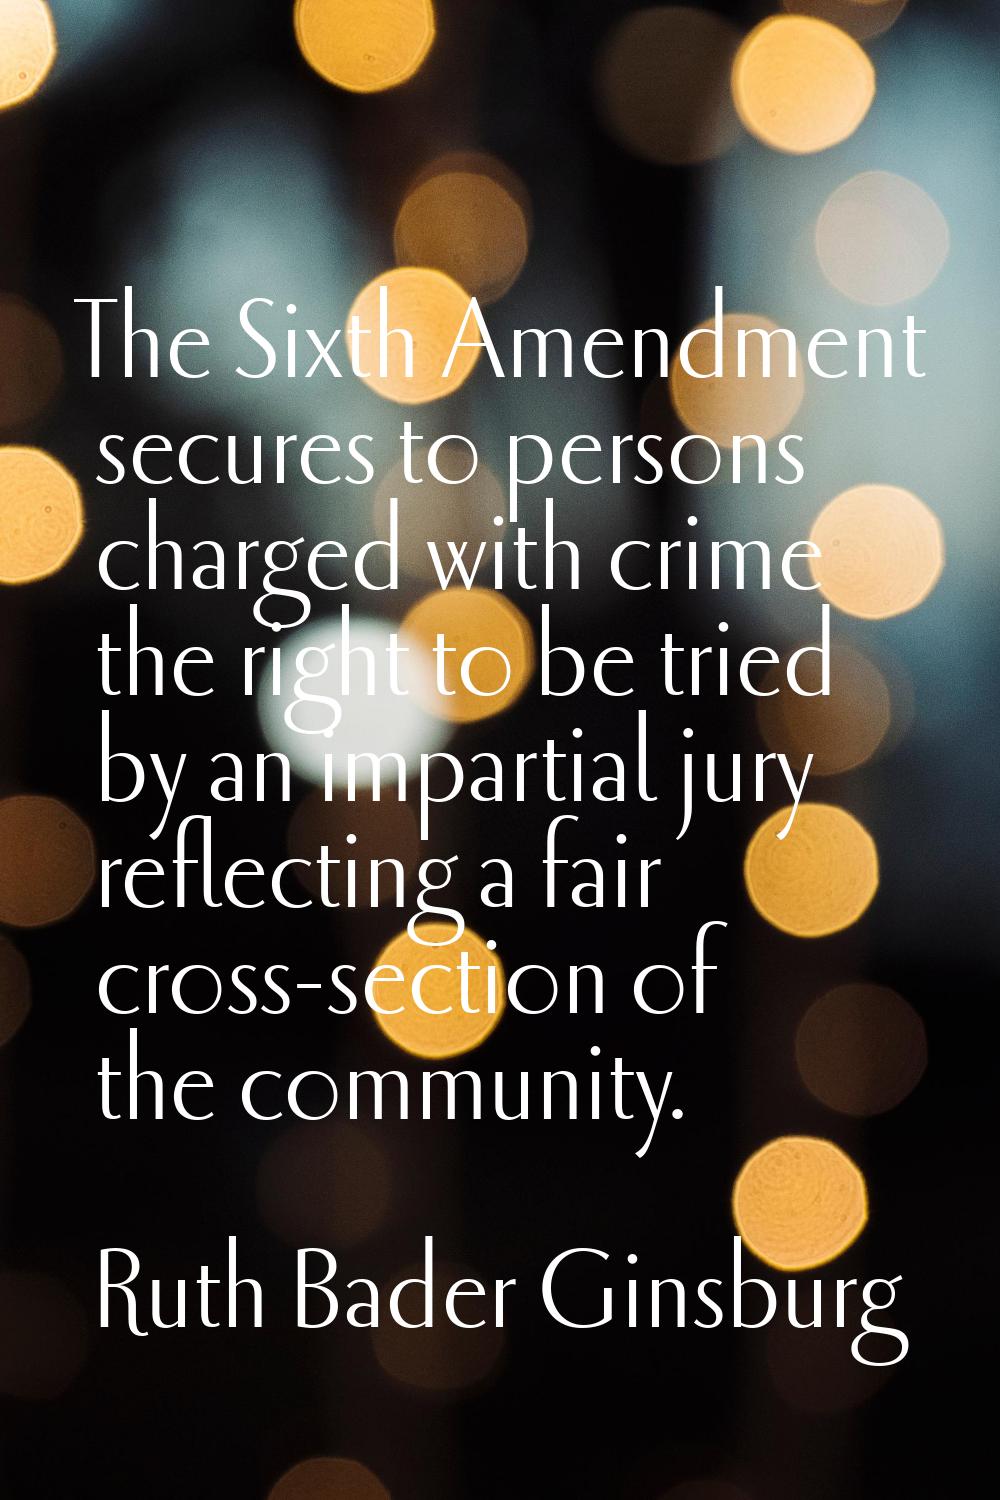 The Sixth Amendment secures to persons charged with crime the right to be tried by an impartial jur